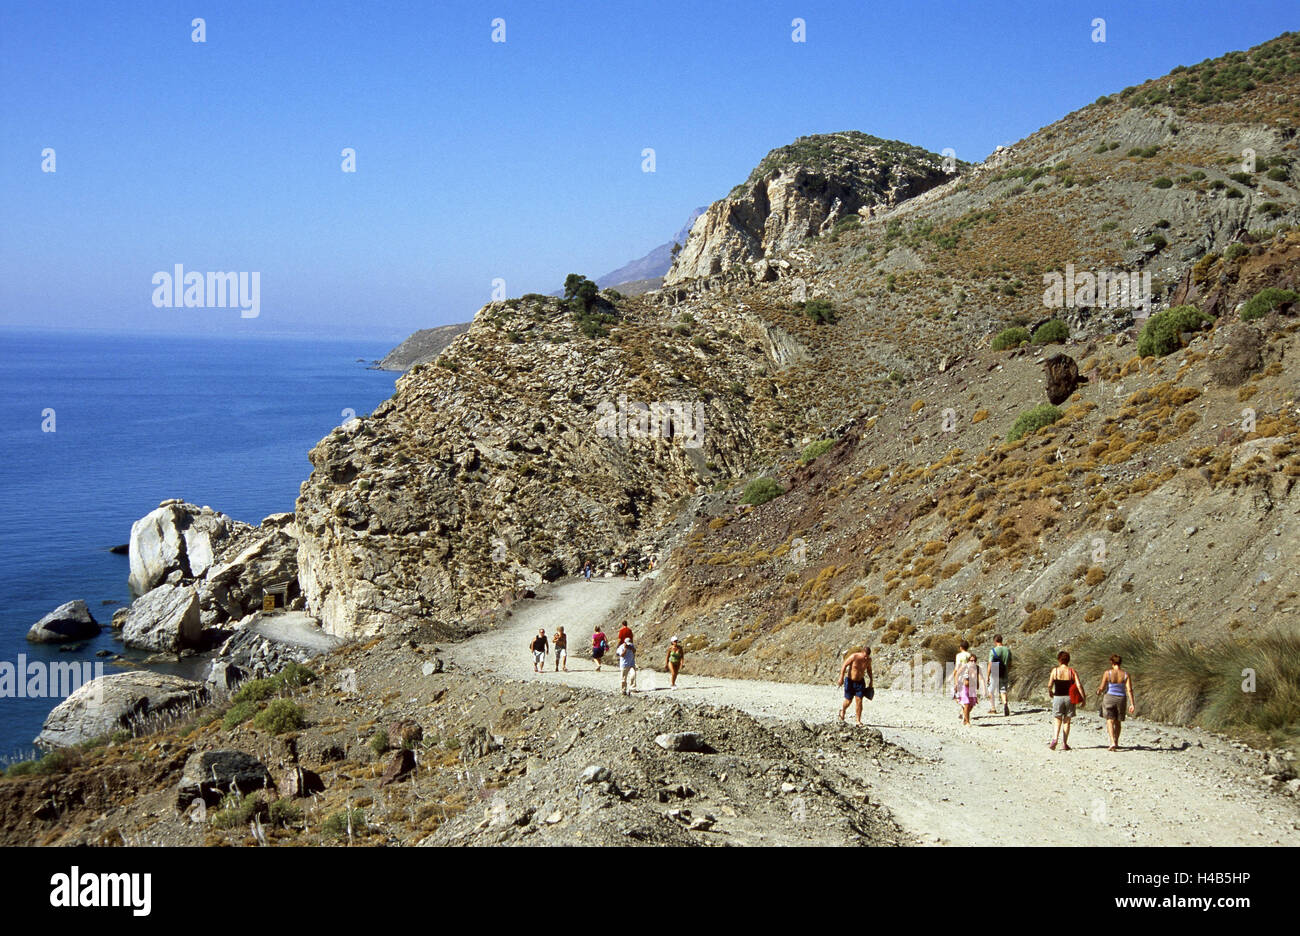 Greece, Dodekanes, island Fondling, cape agio Fokas, Embros Therme, mountain, way, pedestrian, sea, island group, Mediterranean island, the Aegean Sea, Embros-Thermen, coast, bile coast, sources, medicinal springs, thermal sources, thermal waters, place of interest, person, street, gravel road, footpath, scenery, scanty, tourists, tourism, Stock Photo